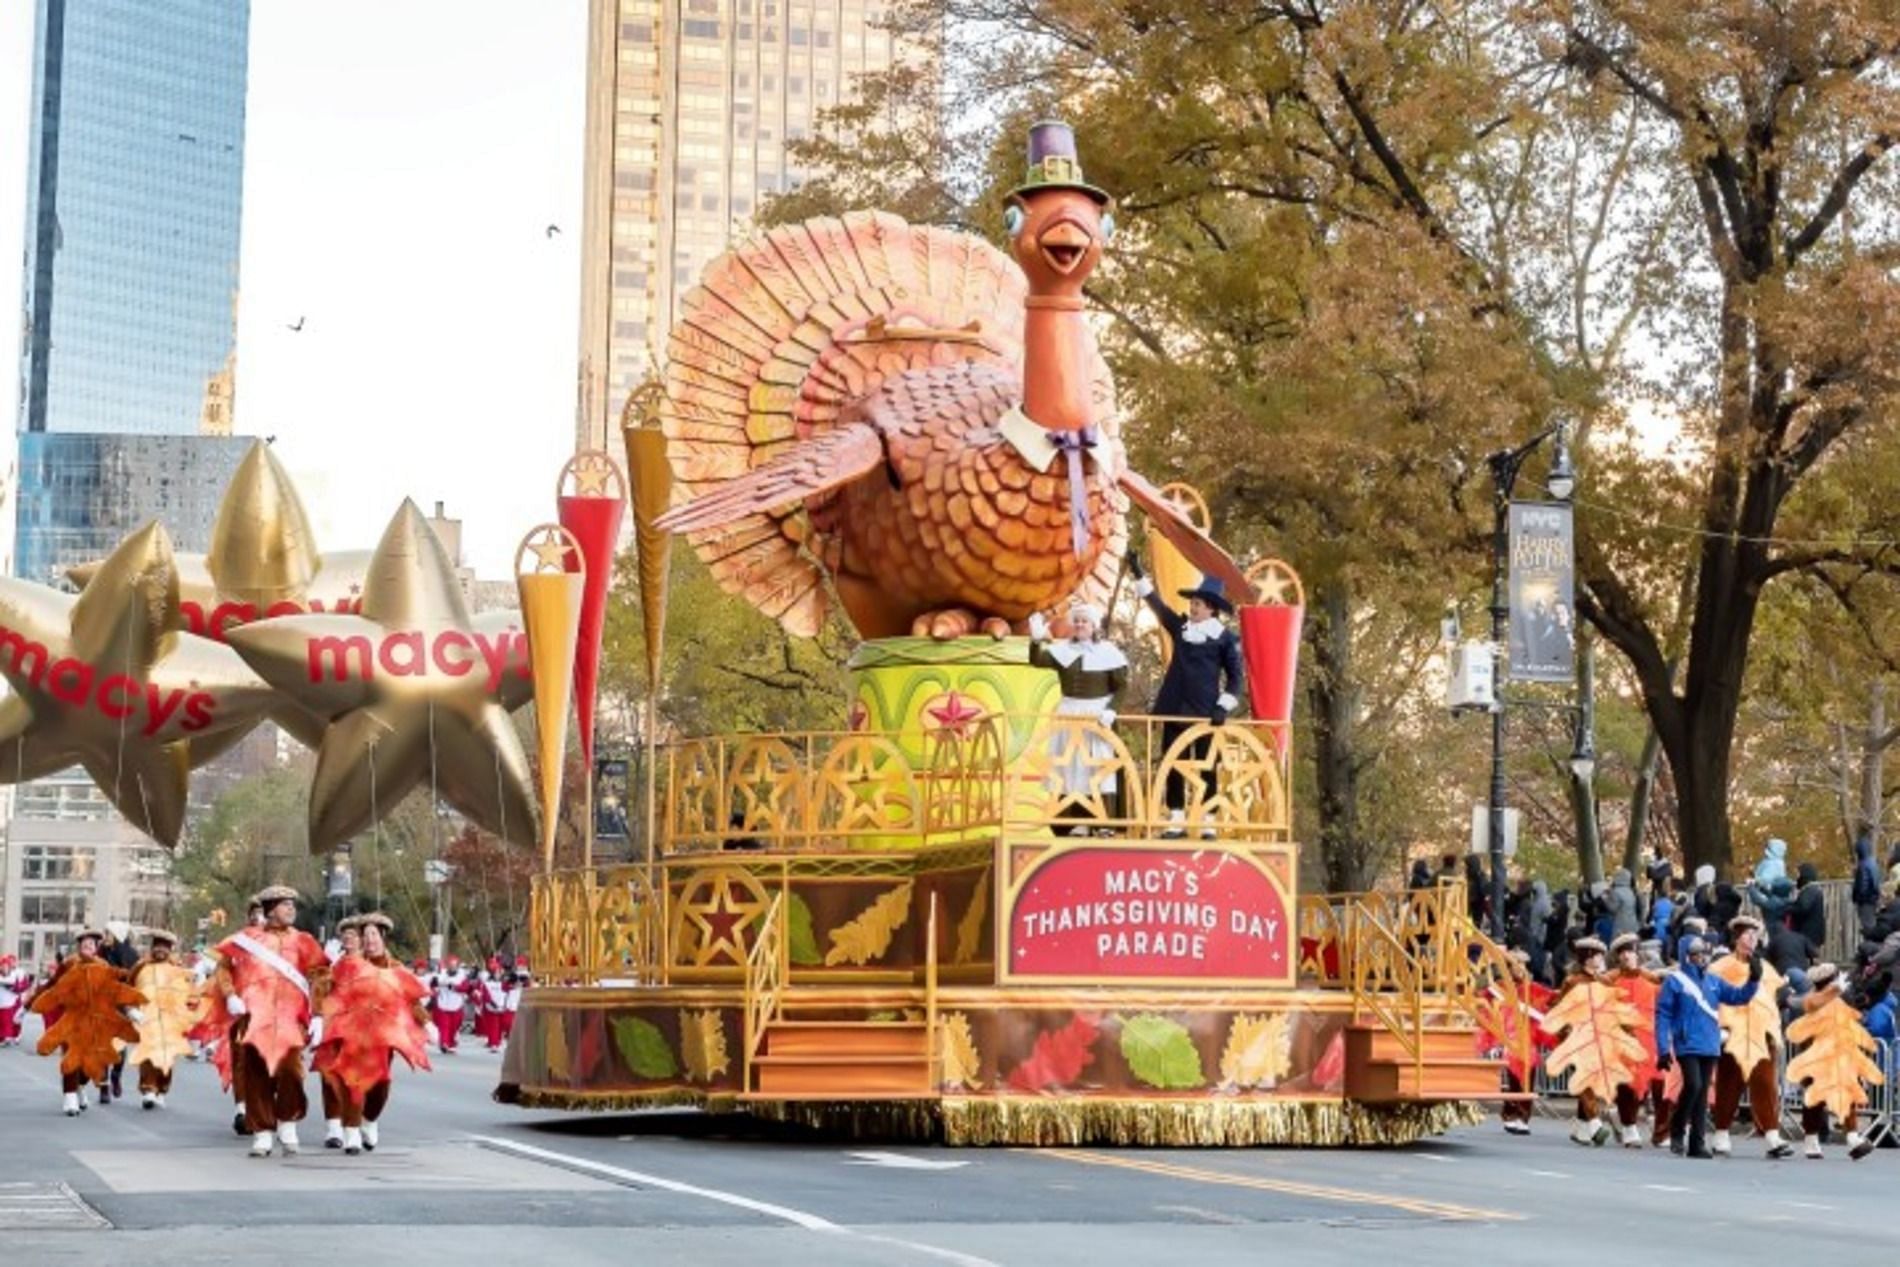 What time and channel is Macy's Thanksgiving Parade? Where to watch